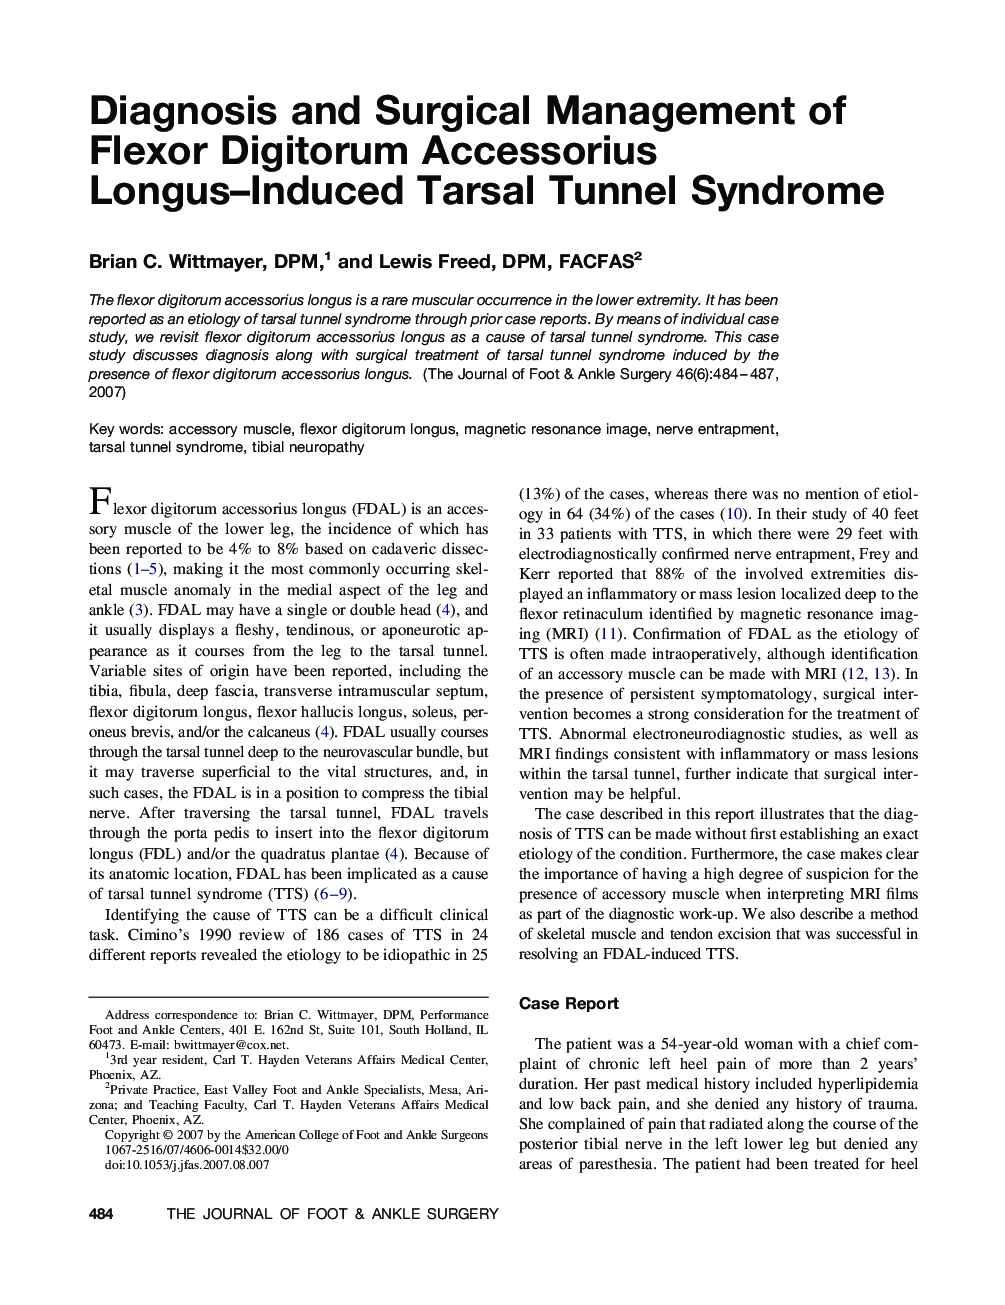 Diagnosis and Surgical Management of Flexor Digitorum Accessorius Longus–Induced Tarsal Tunnel Syndrome